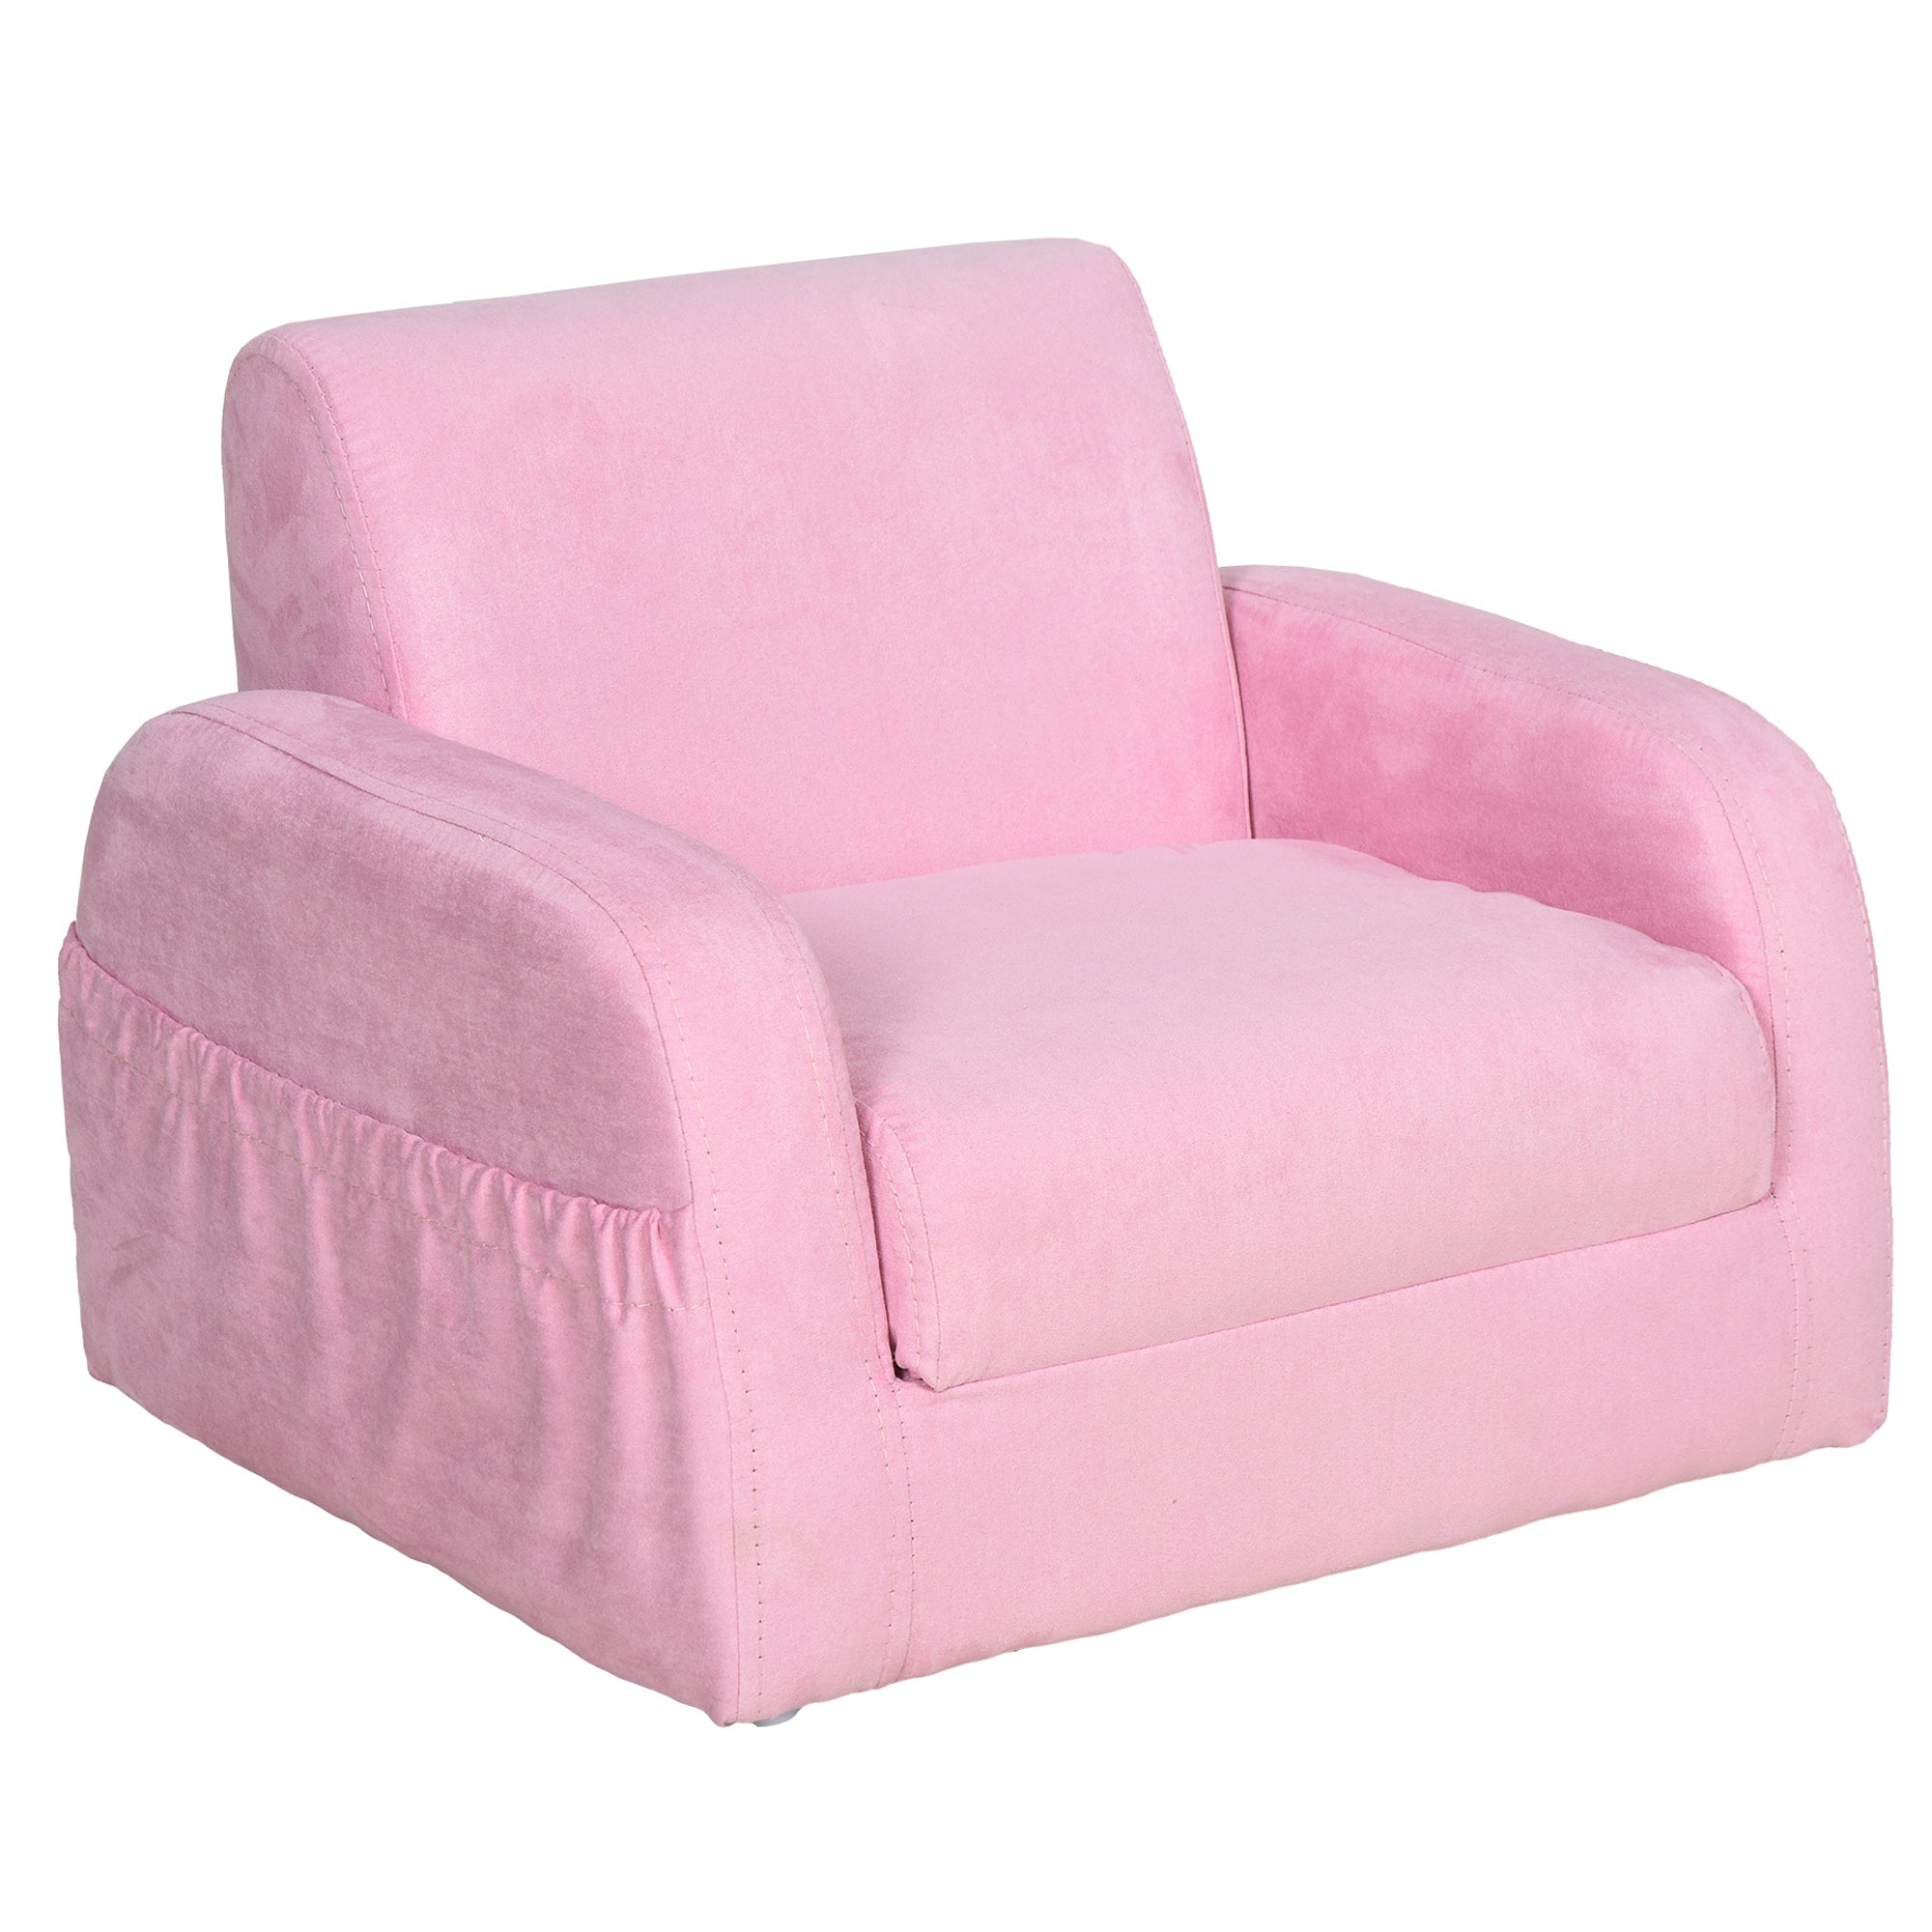 HOMCOM 2 In 1 Kids Armchair Sofa Bed Fold Out Padded Wood Frame Bedroom Pink  | TJ Hughes Grey